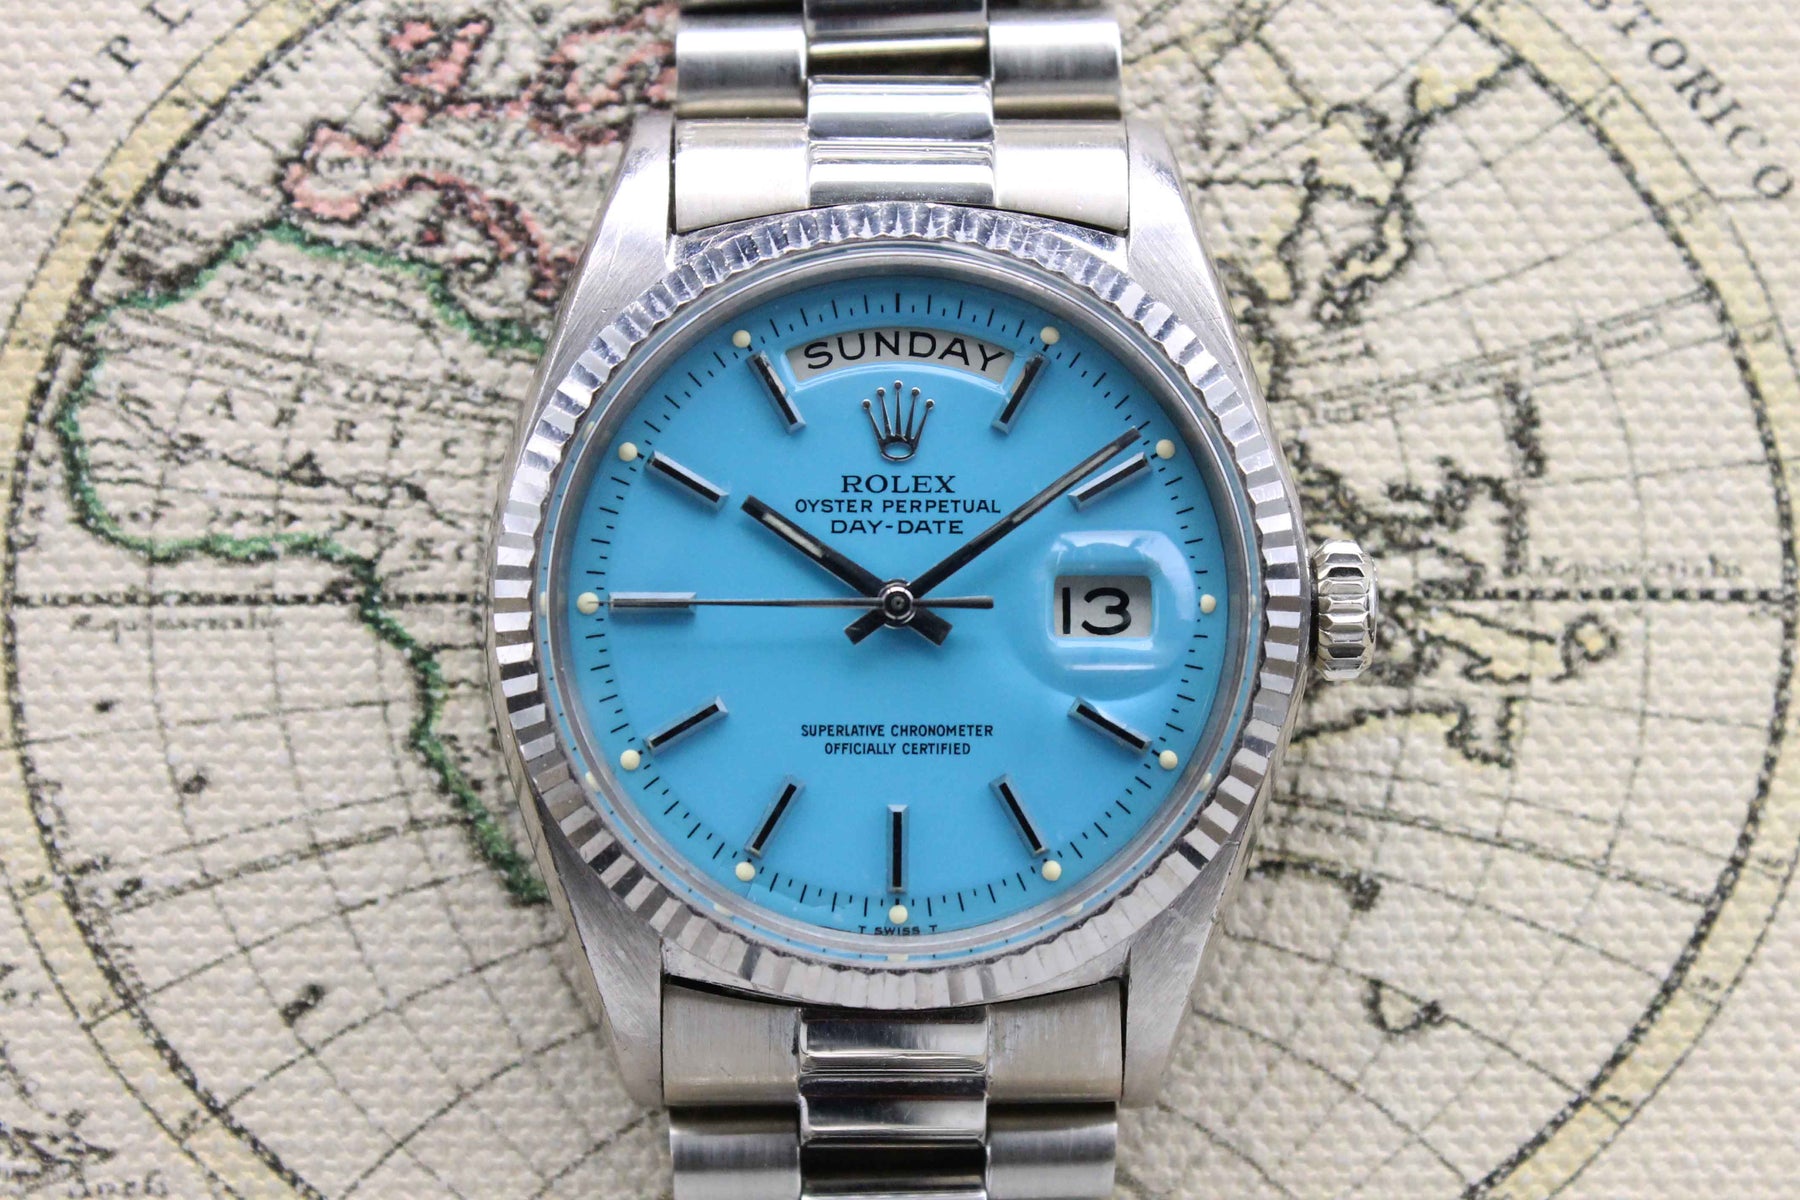 1967 Rolex Day Date WG Turquoise Stella Dial Ref. 1803